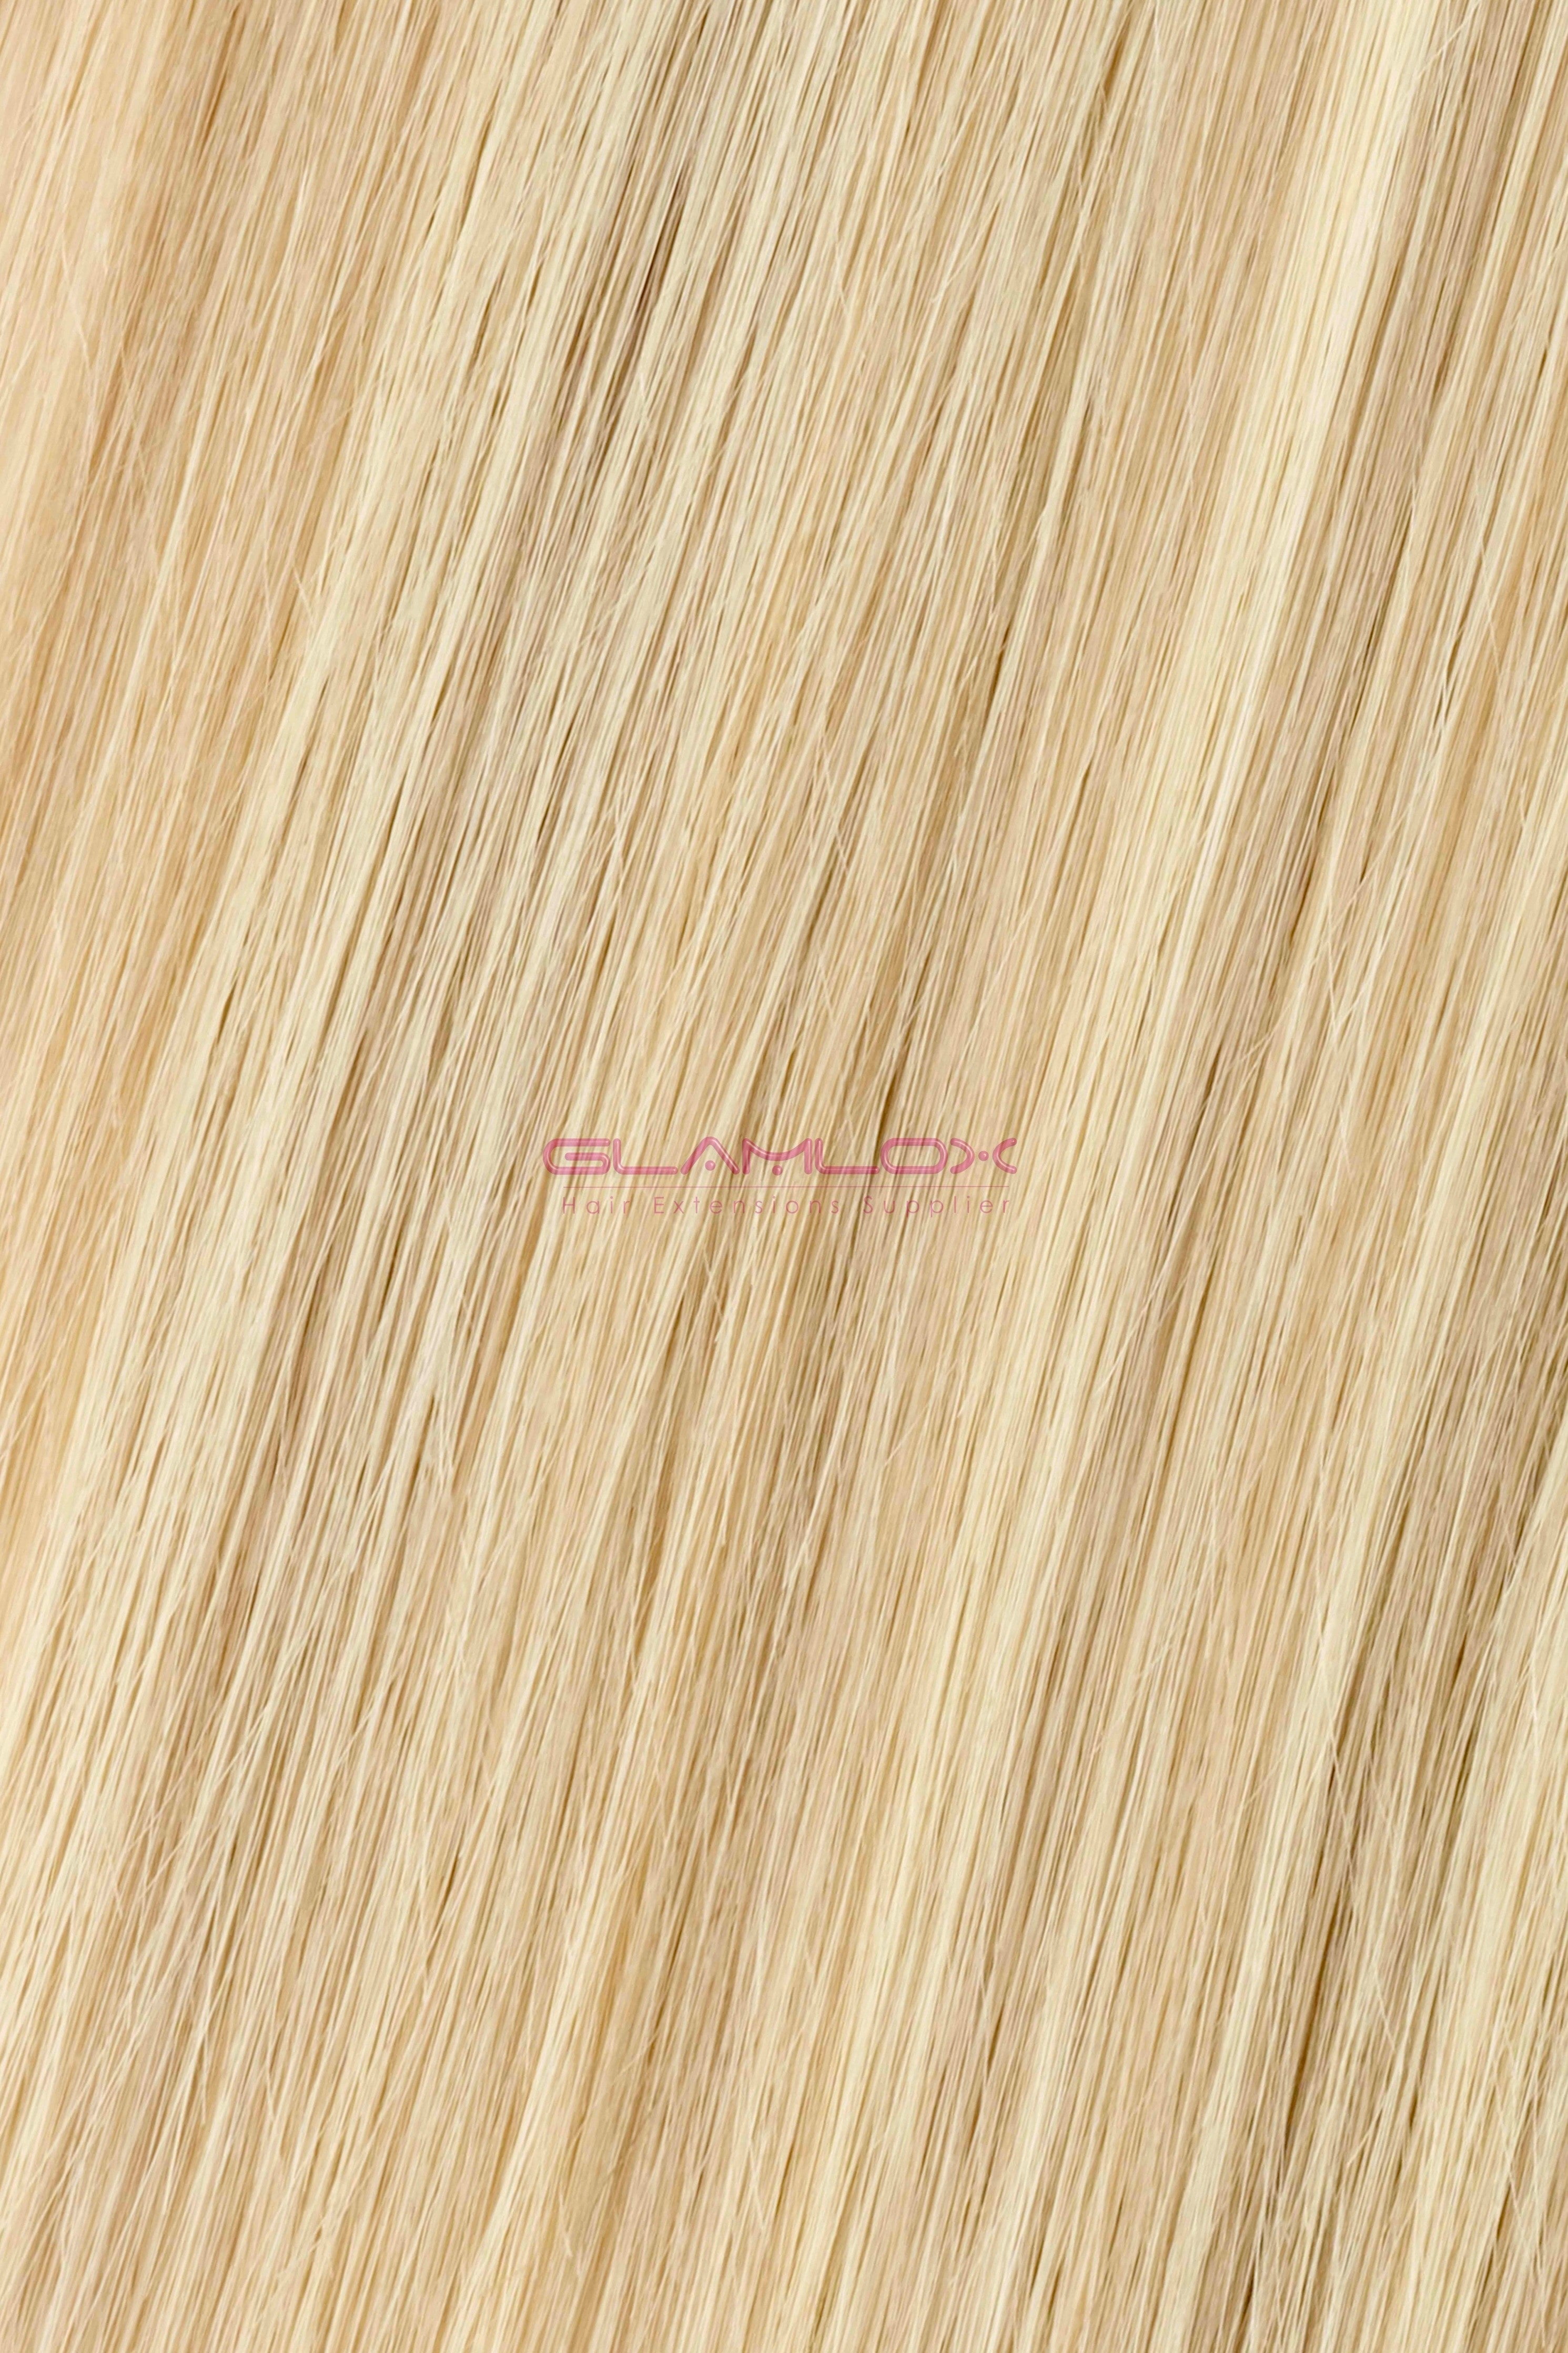 16" Half Weft Hair Extensions - Russian Mongolian Double Drawn Remy Human Hair